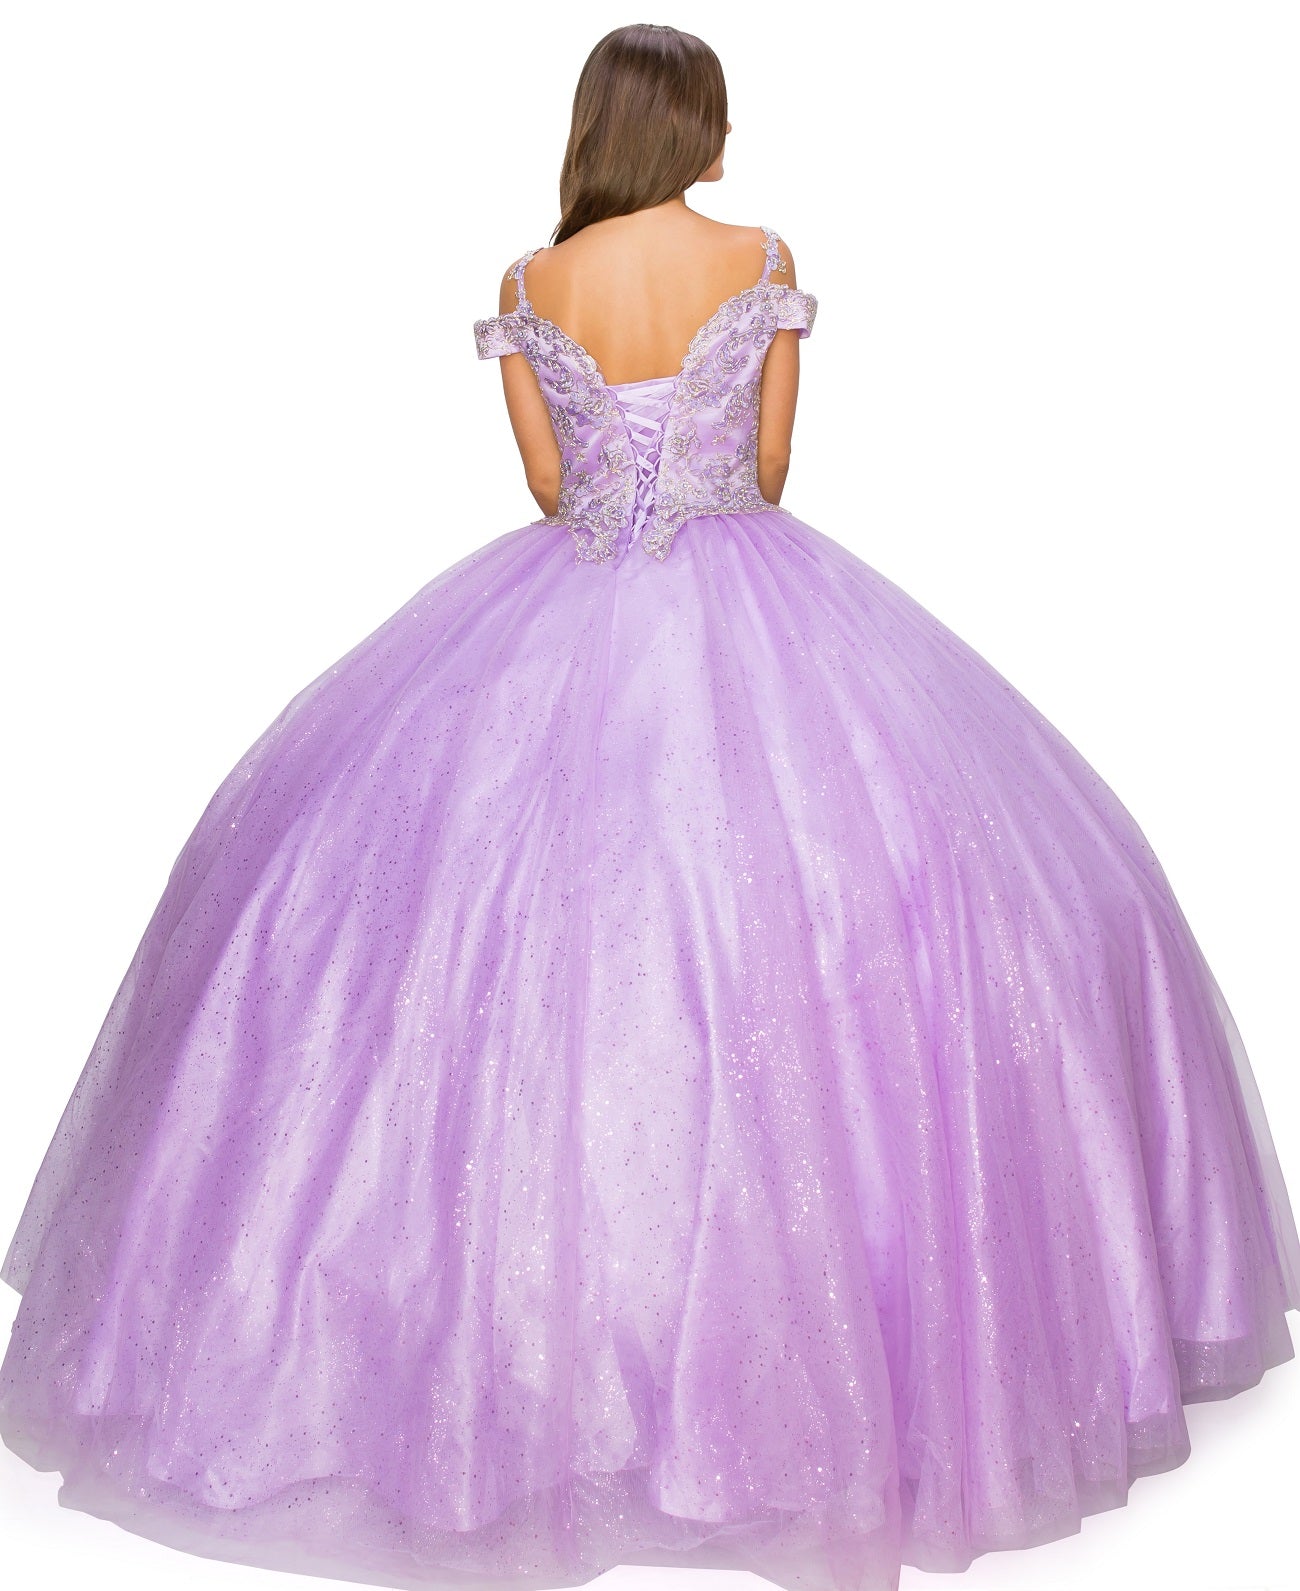 Off the Shoulder Tulle Lace Quinceanera Dresses by Cinderella Couture USA AS8028J_LIL